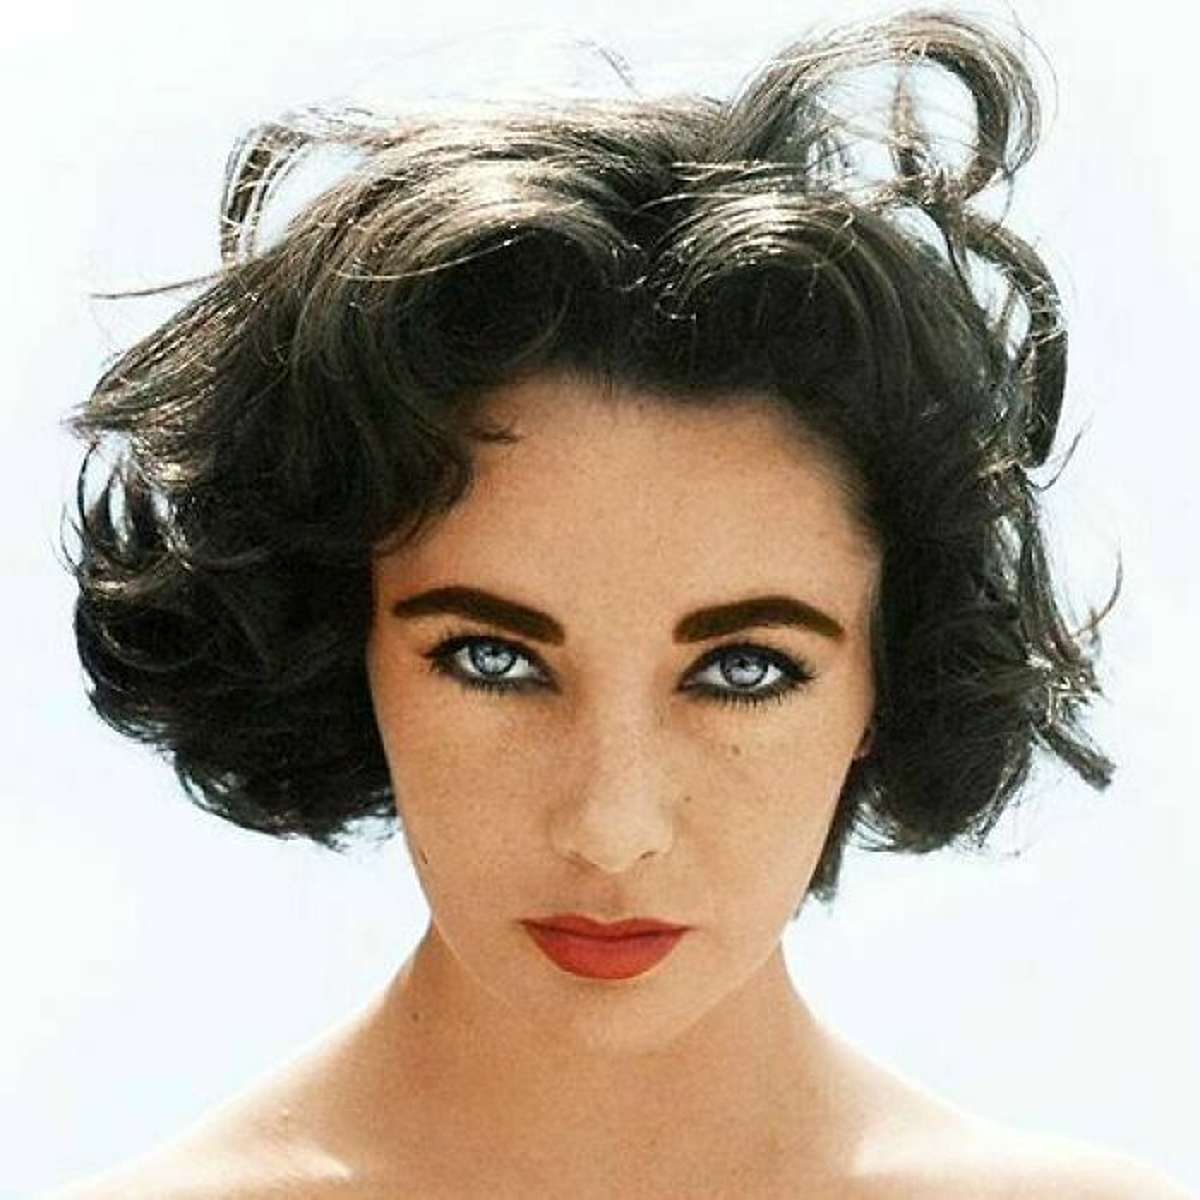 Elizabeth Taylor For The Look Magazine In 1956